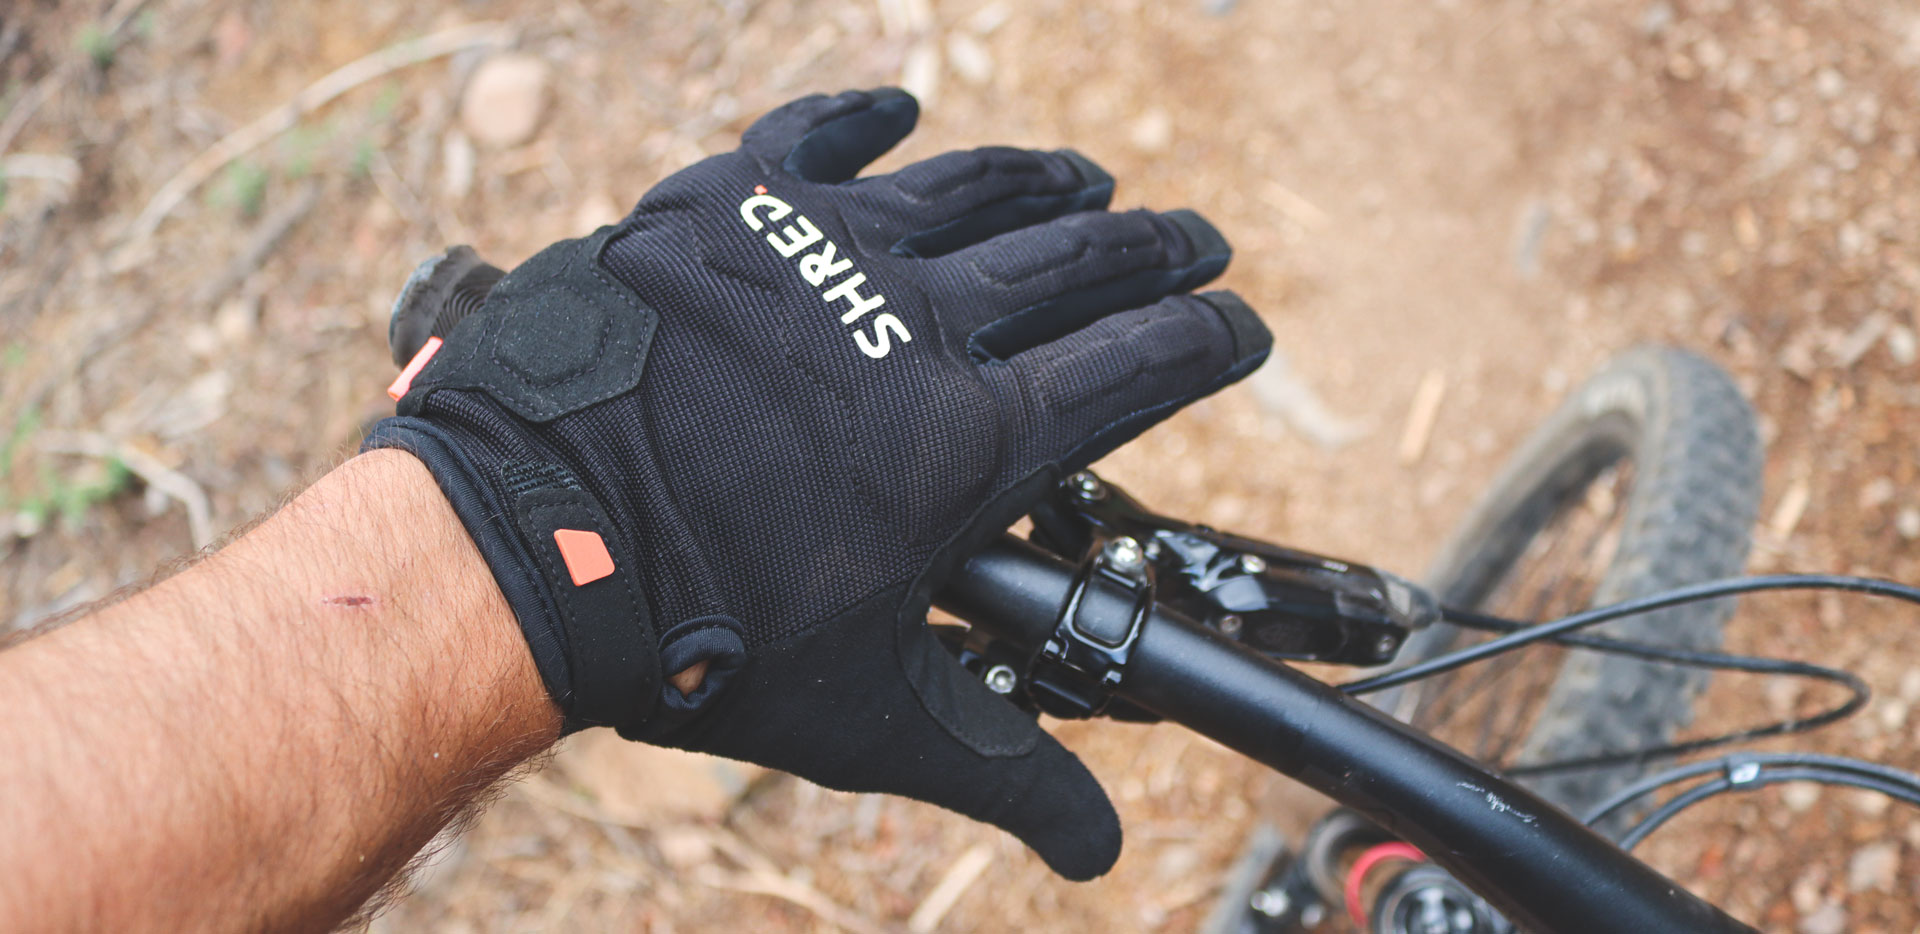 SHRED. MTB PROTECTIVE GLOVES Review